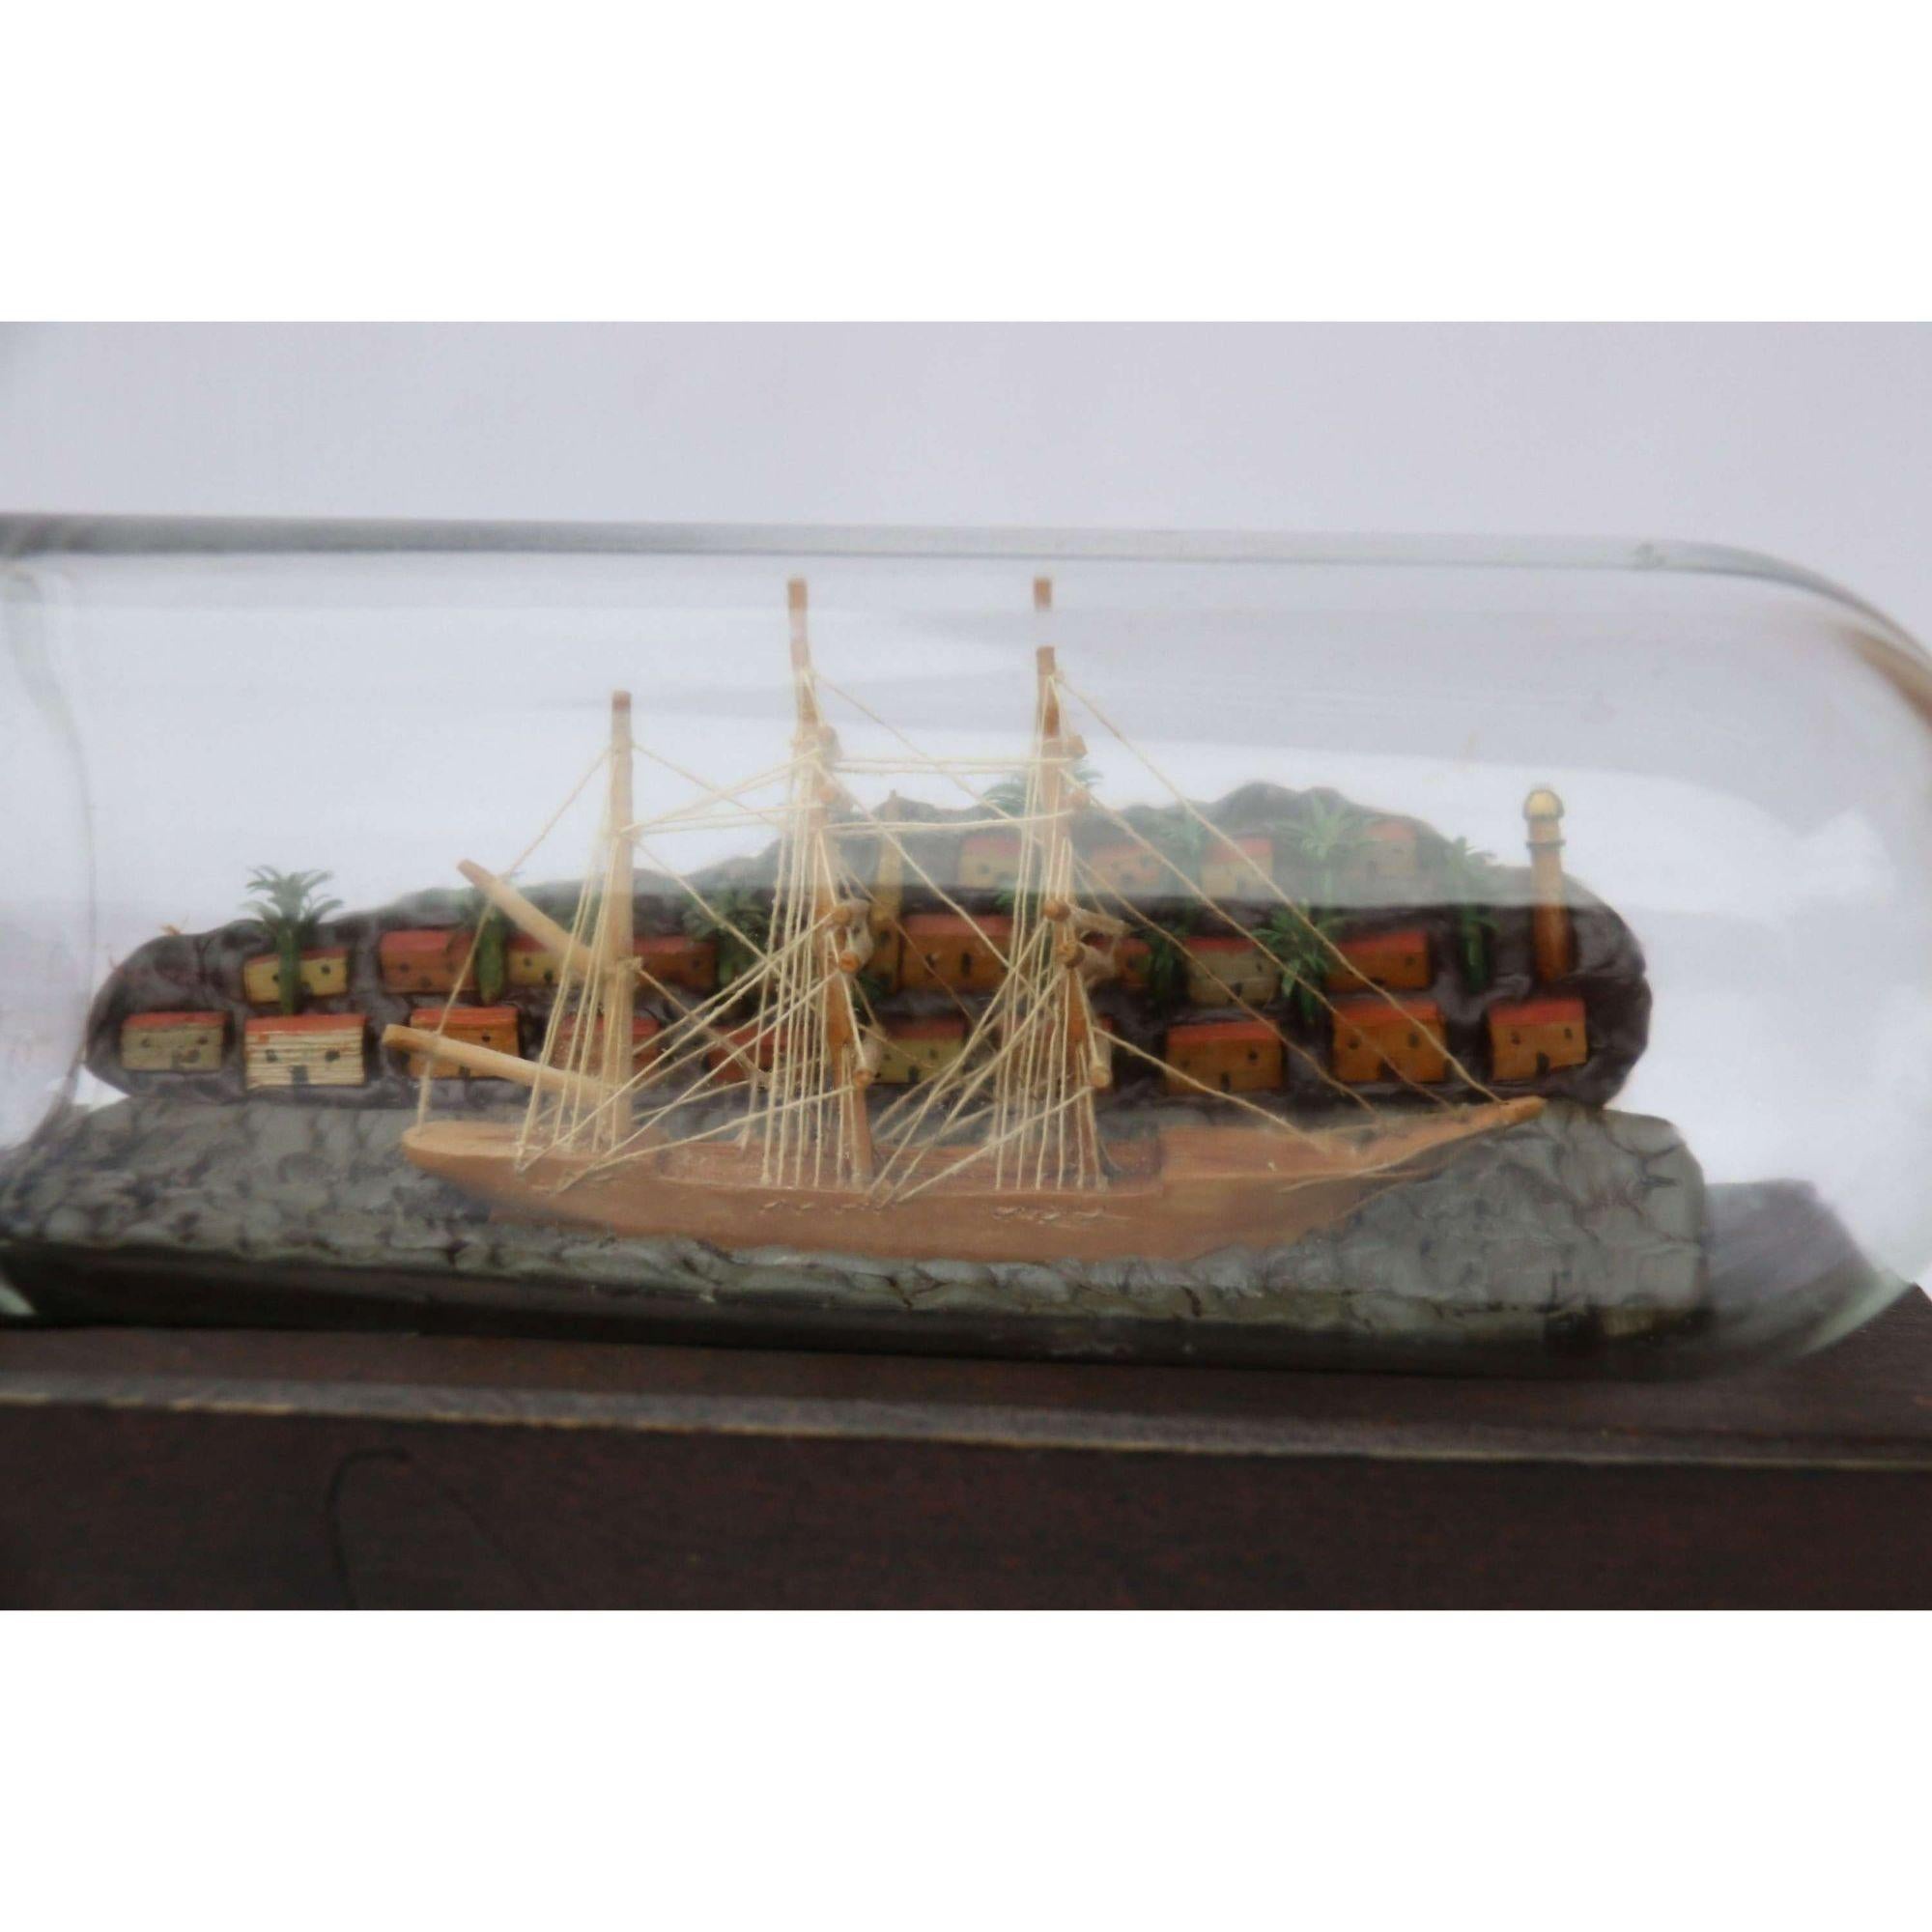 Wood Early 20th Century Model Ship Diorama Within a Bottle, circa 1920 For Sale